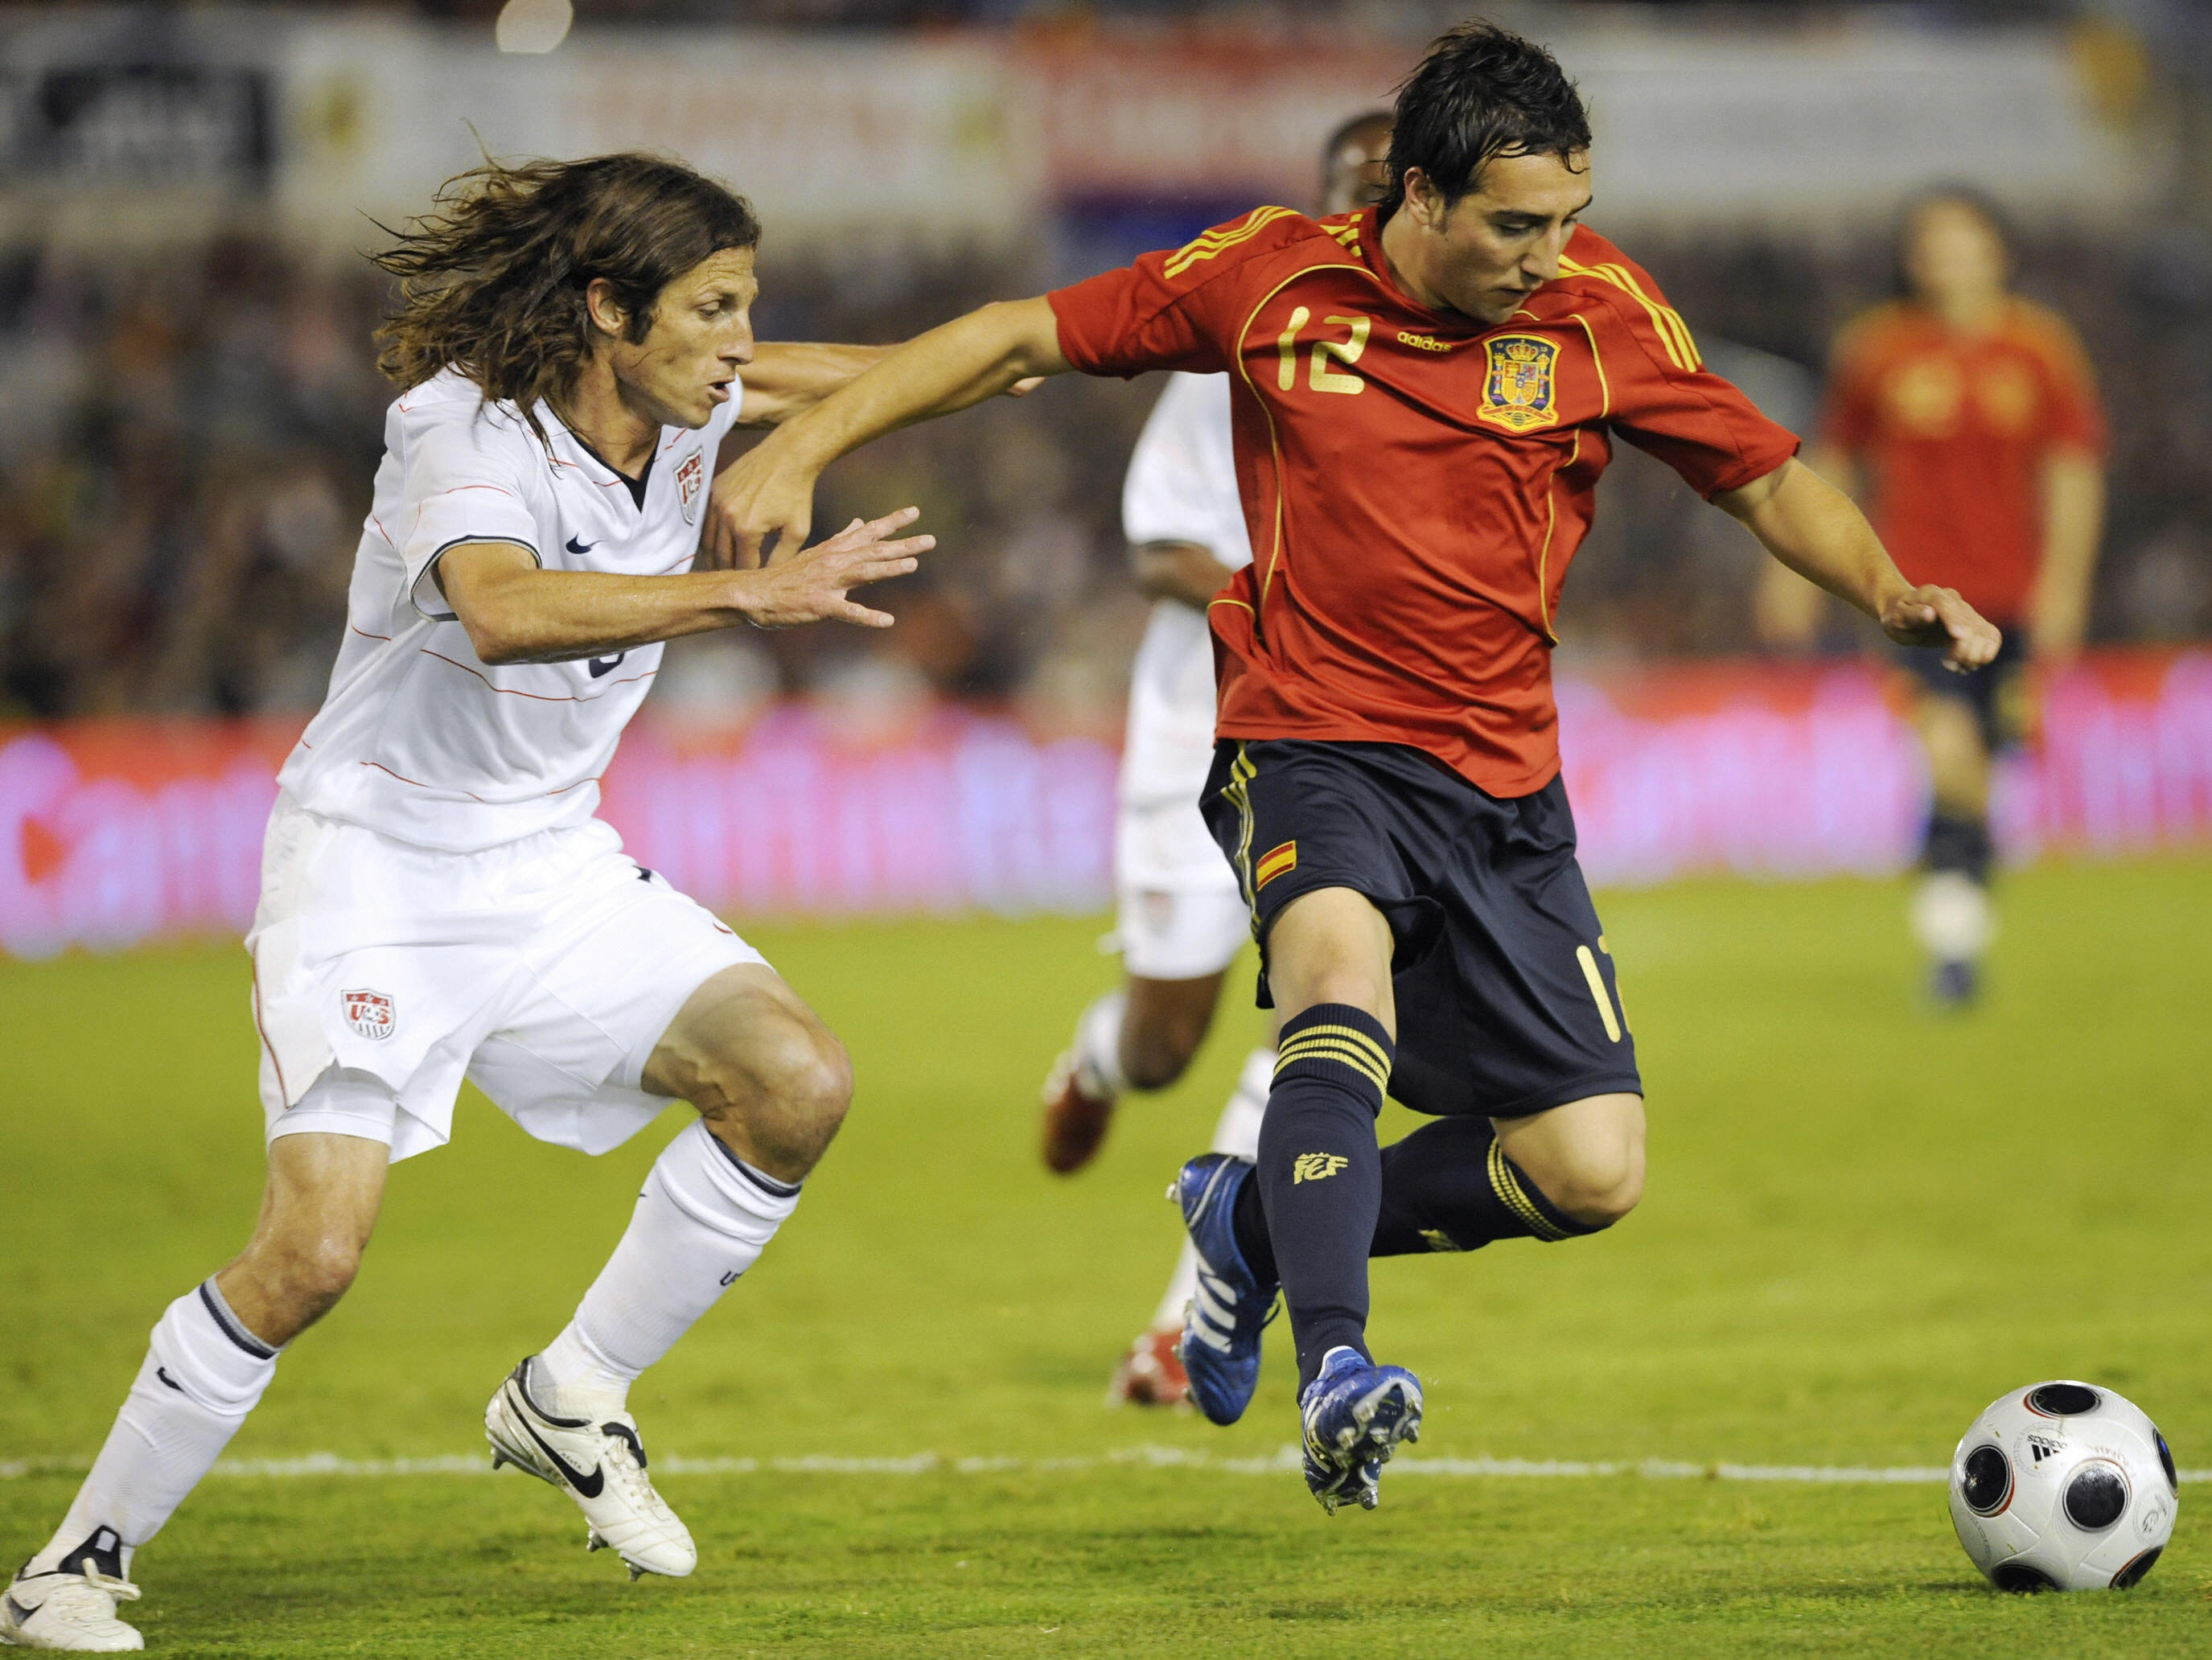 Spain's Santi Cazorla holds off a United States player in a friendly in 2010.